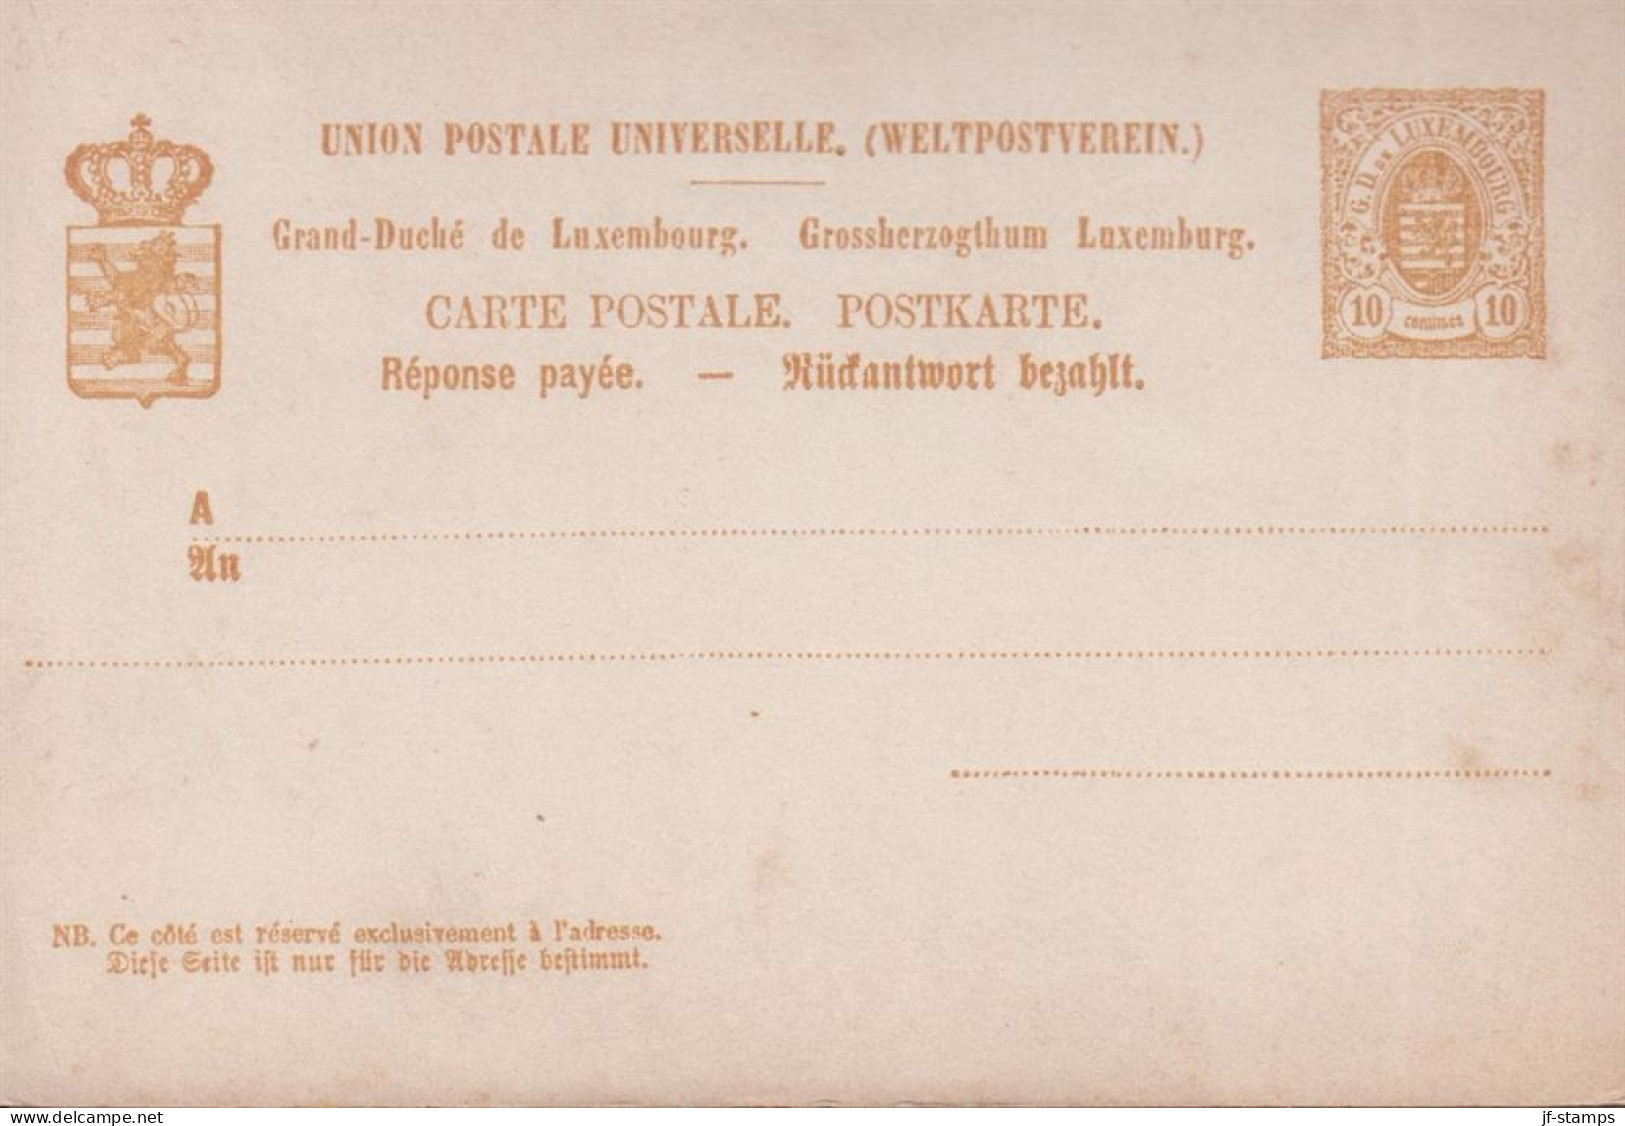 1879. LUXEMBOURG. CARTE POSTALE. 10 Centimes Double Card With Response Payee. - JF445177 - Stamped Stationery